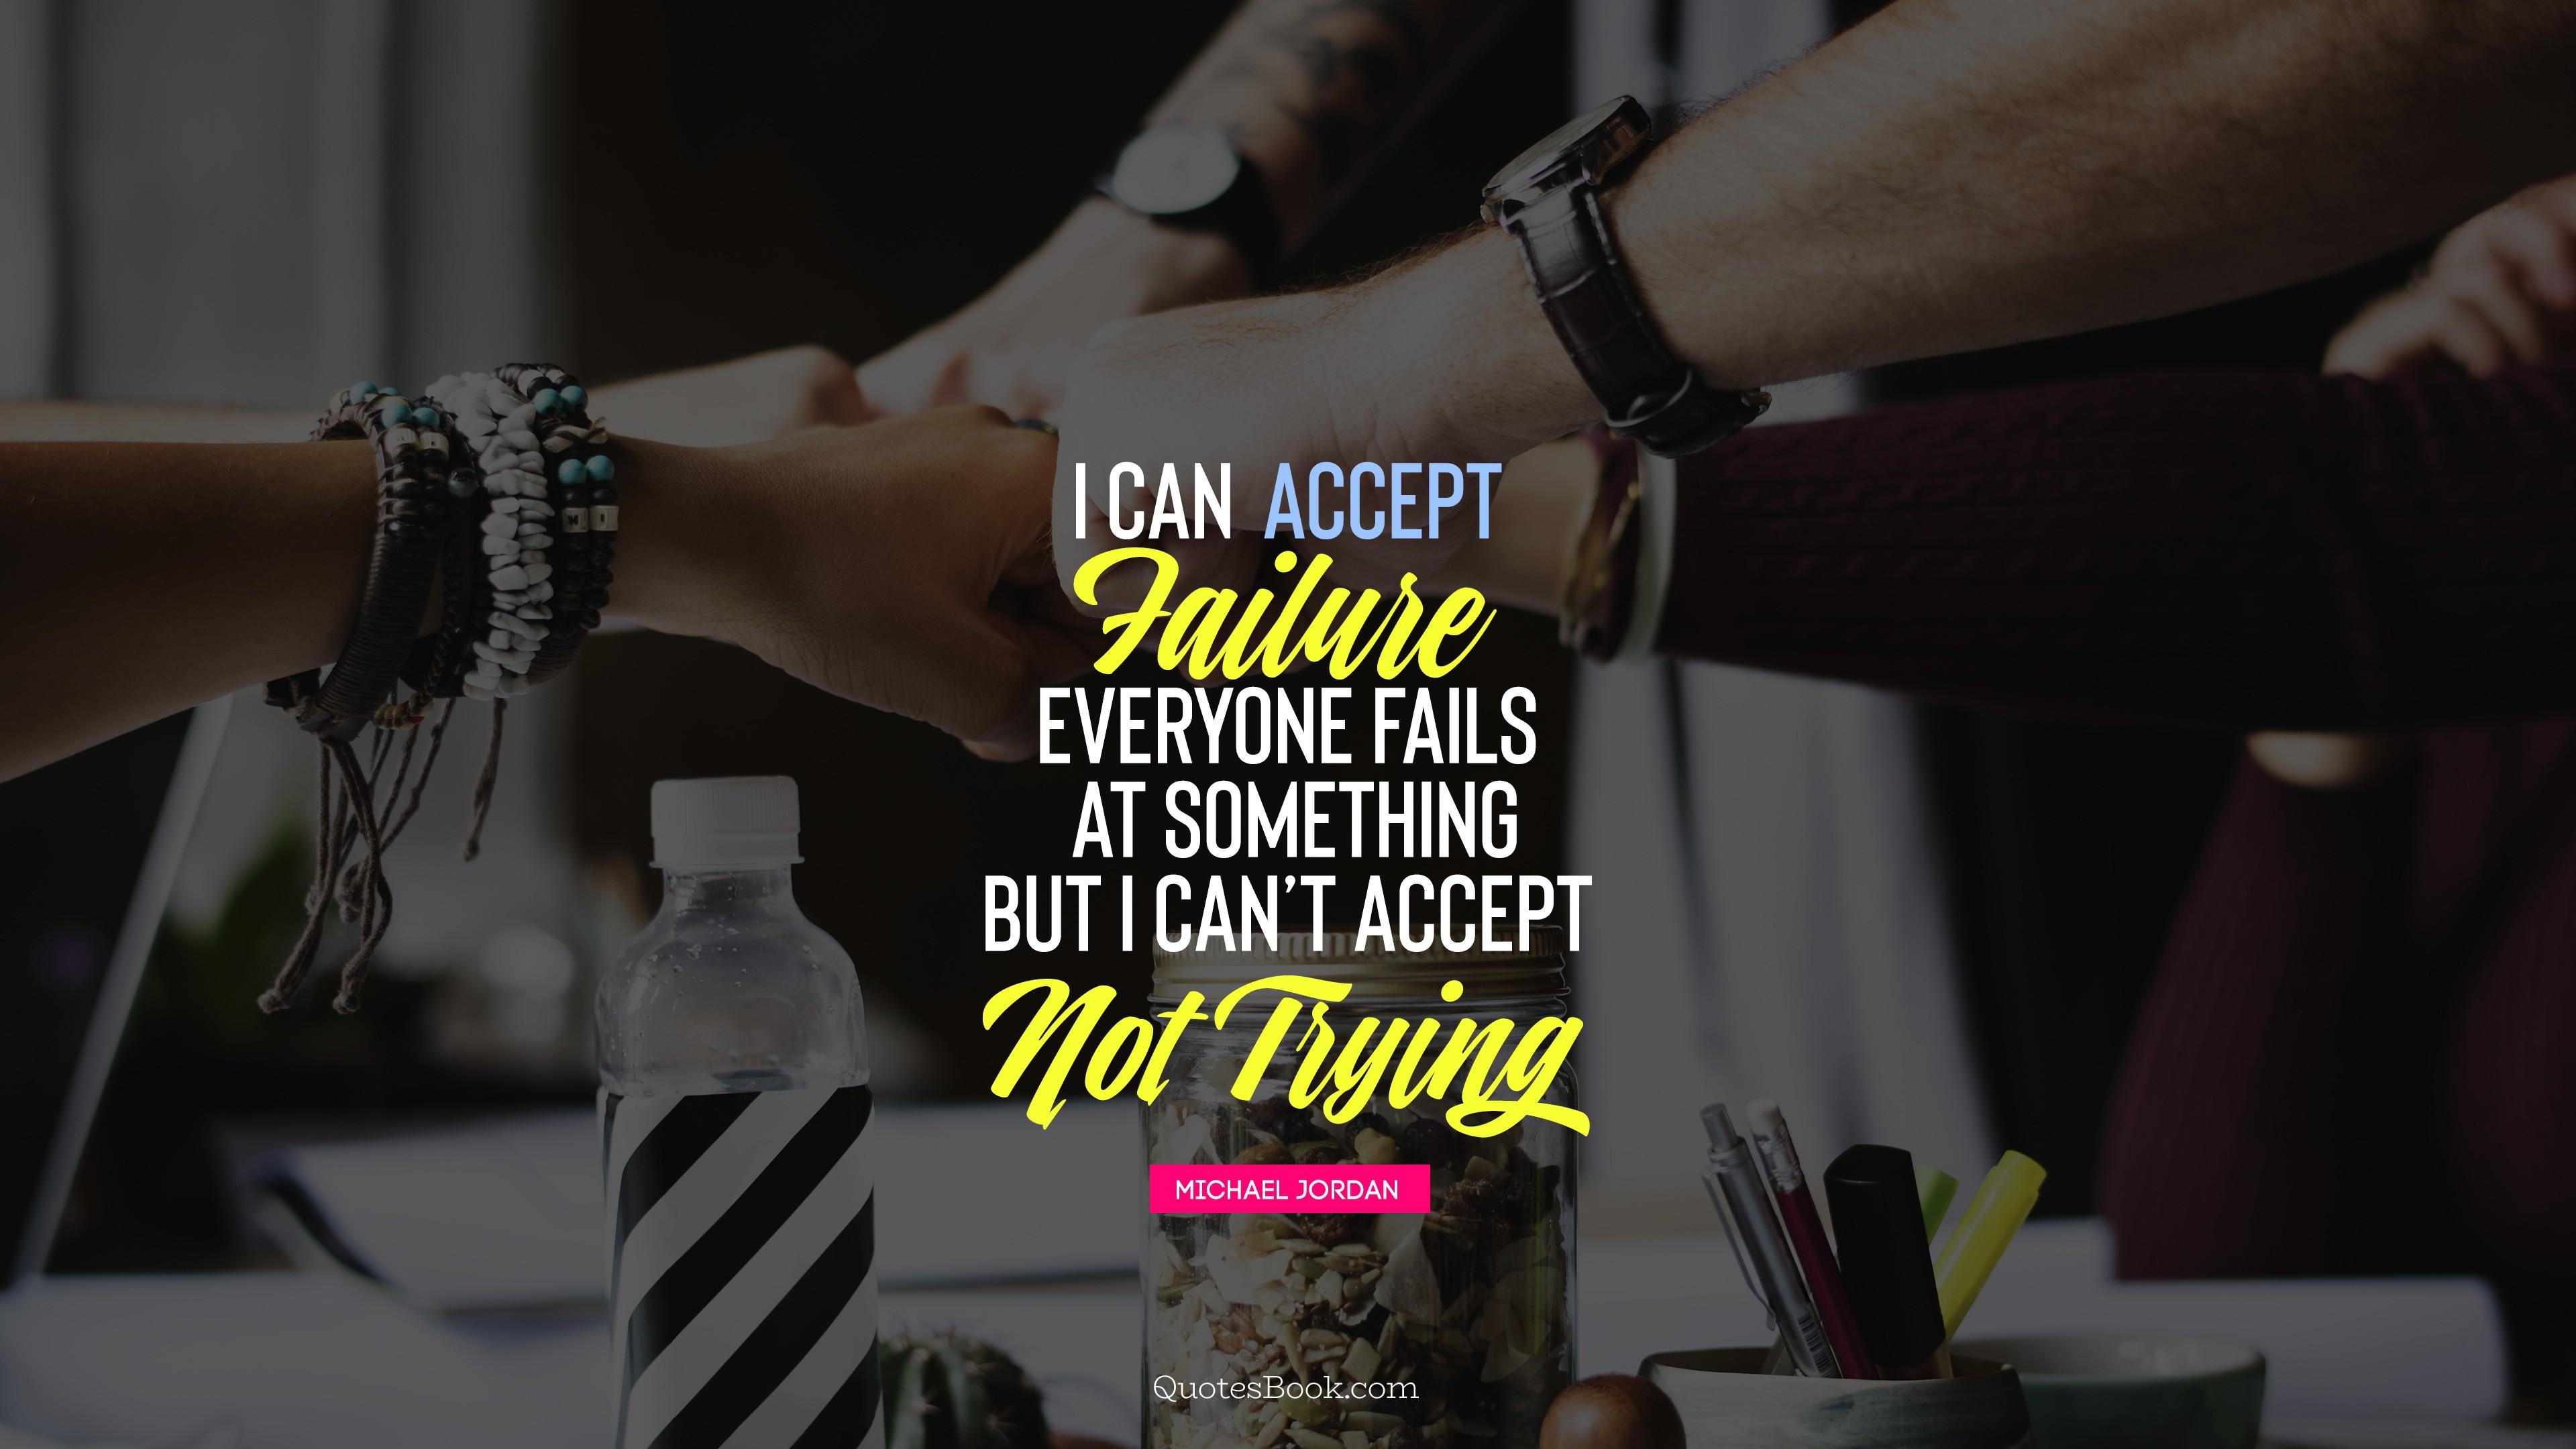 I can accept failure, everyone fails at something but i can